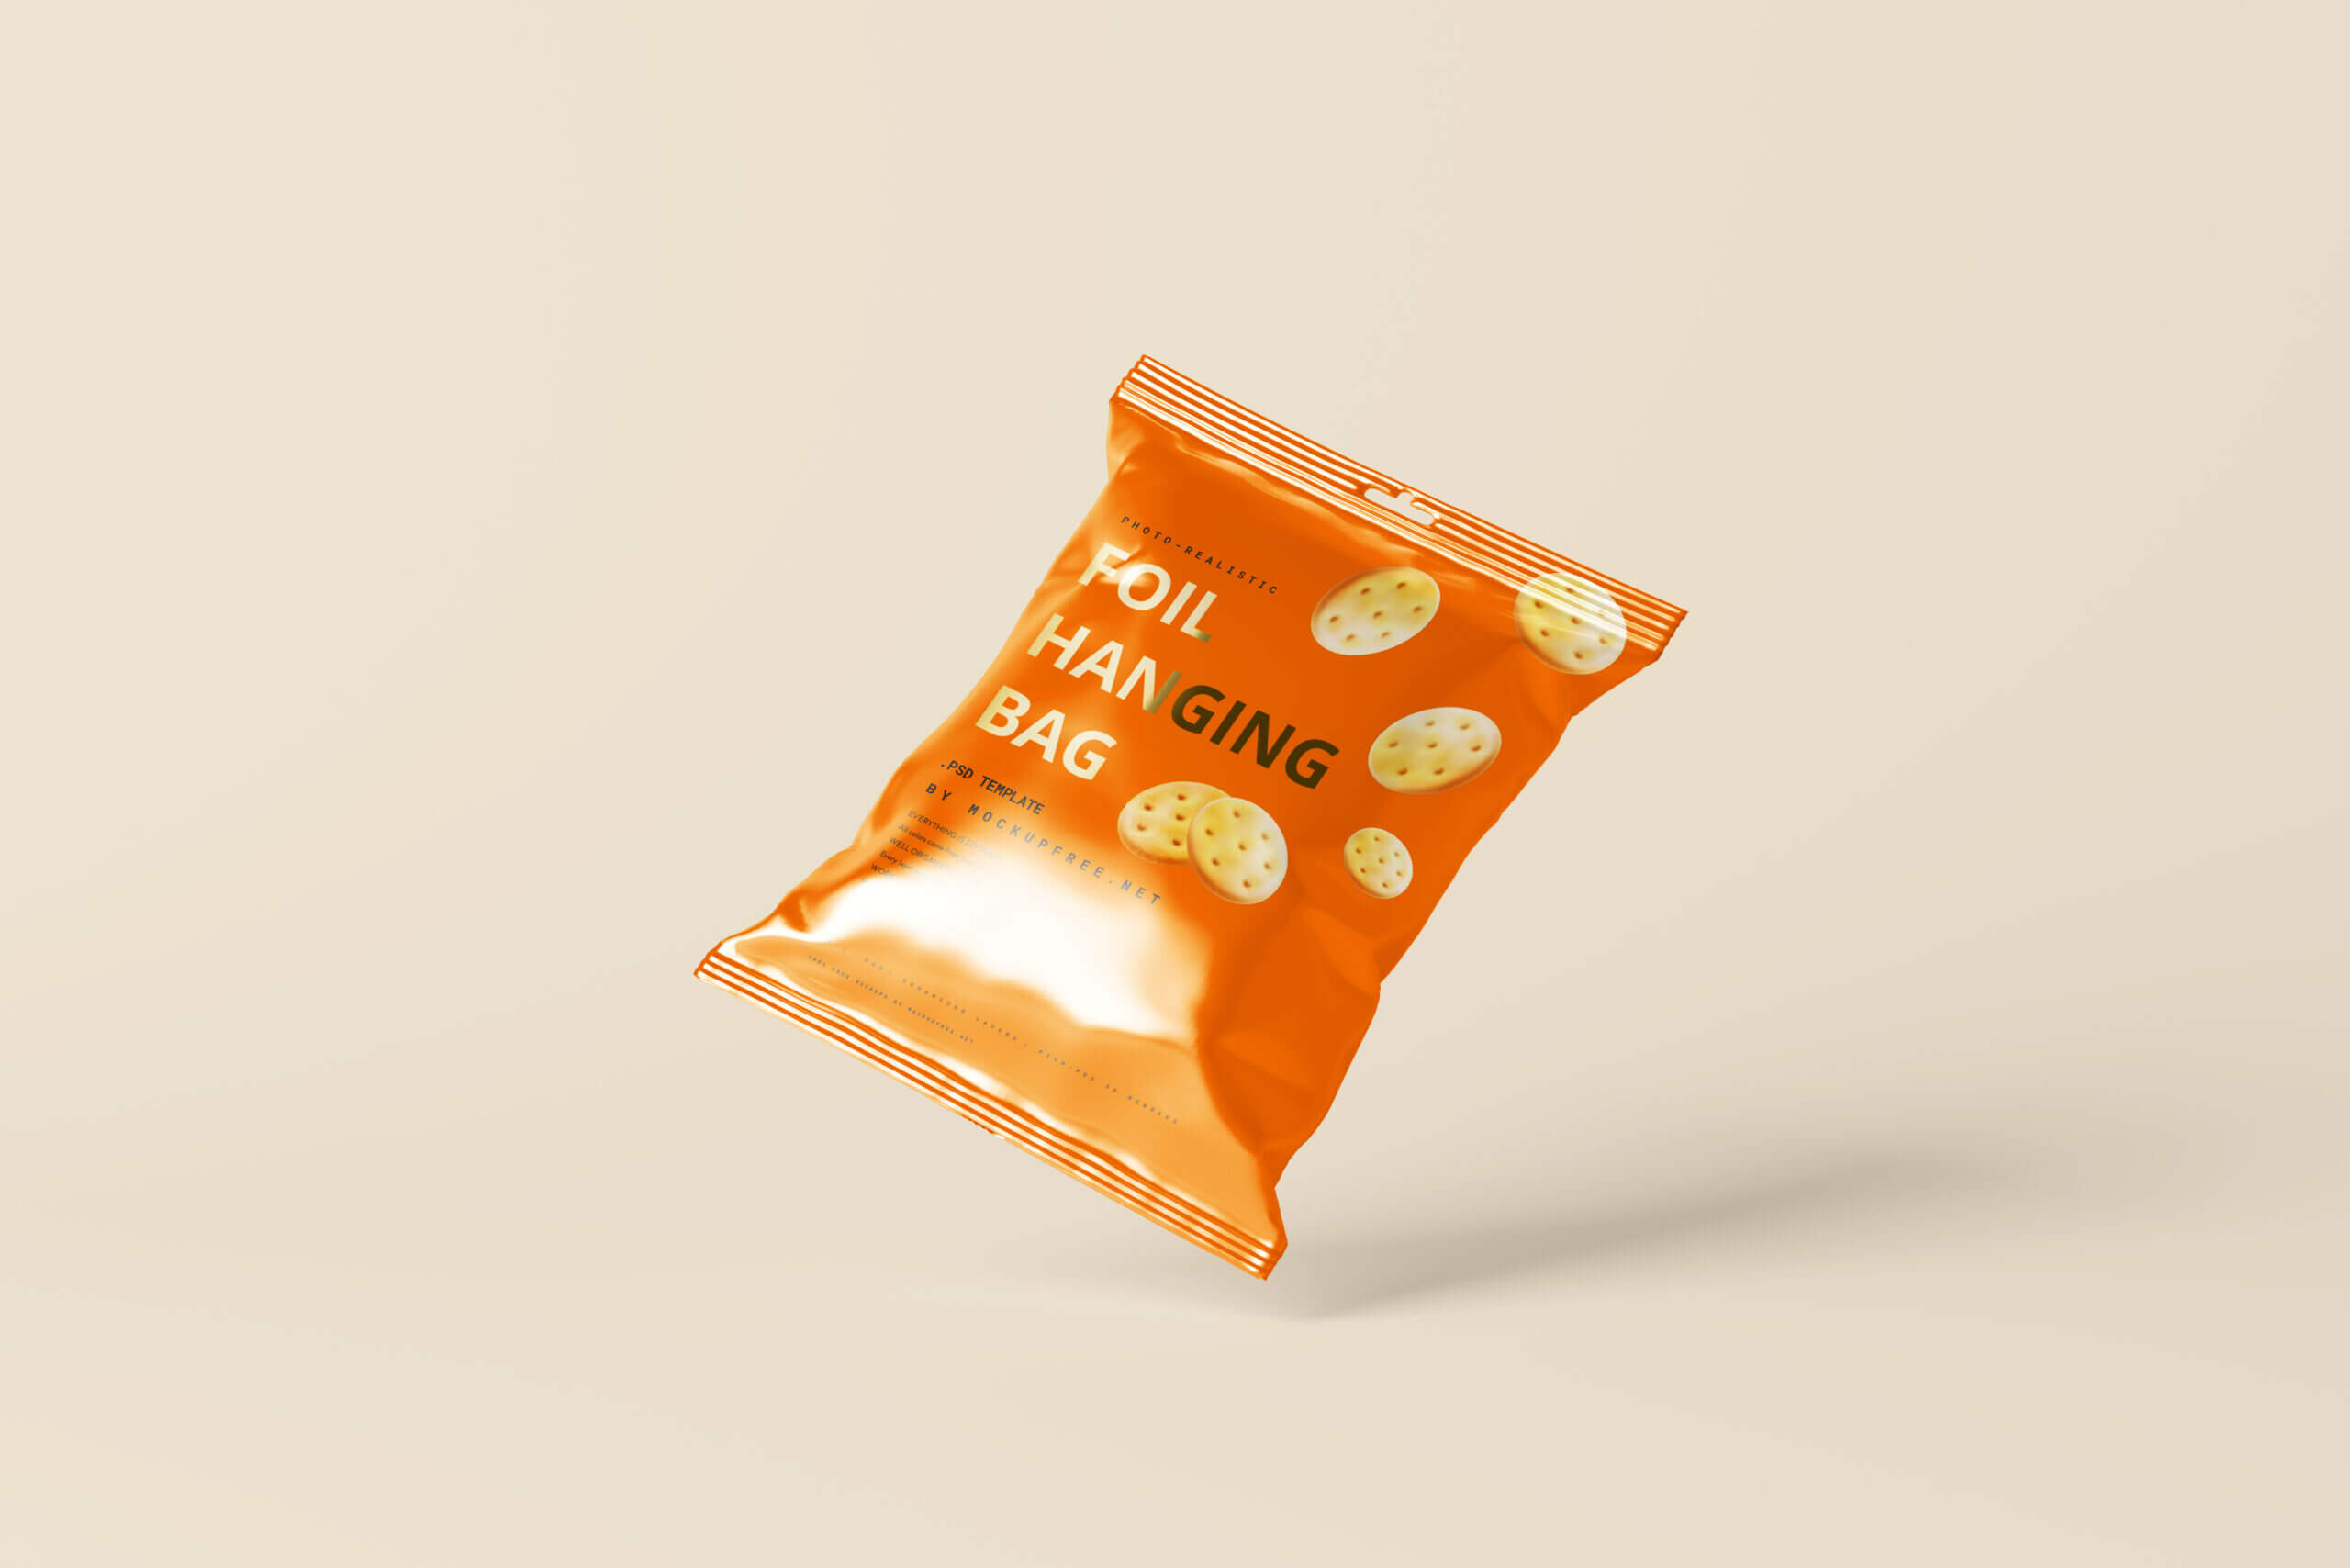 Hanging Snack Bag and Chips Foil Packet Mockups 10 different view7